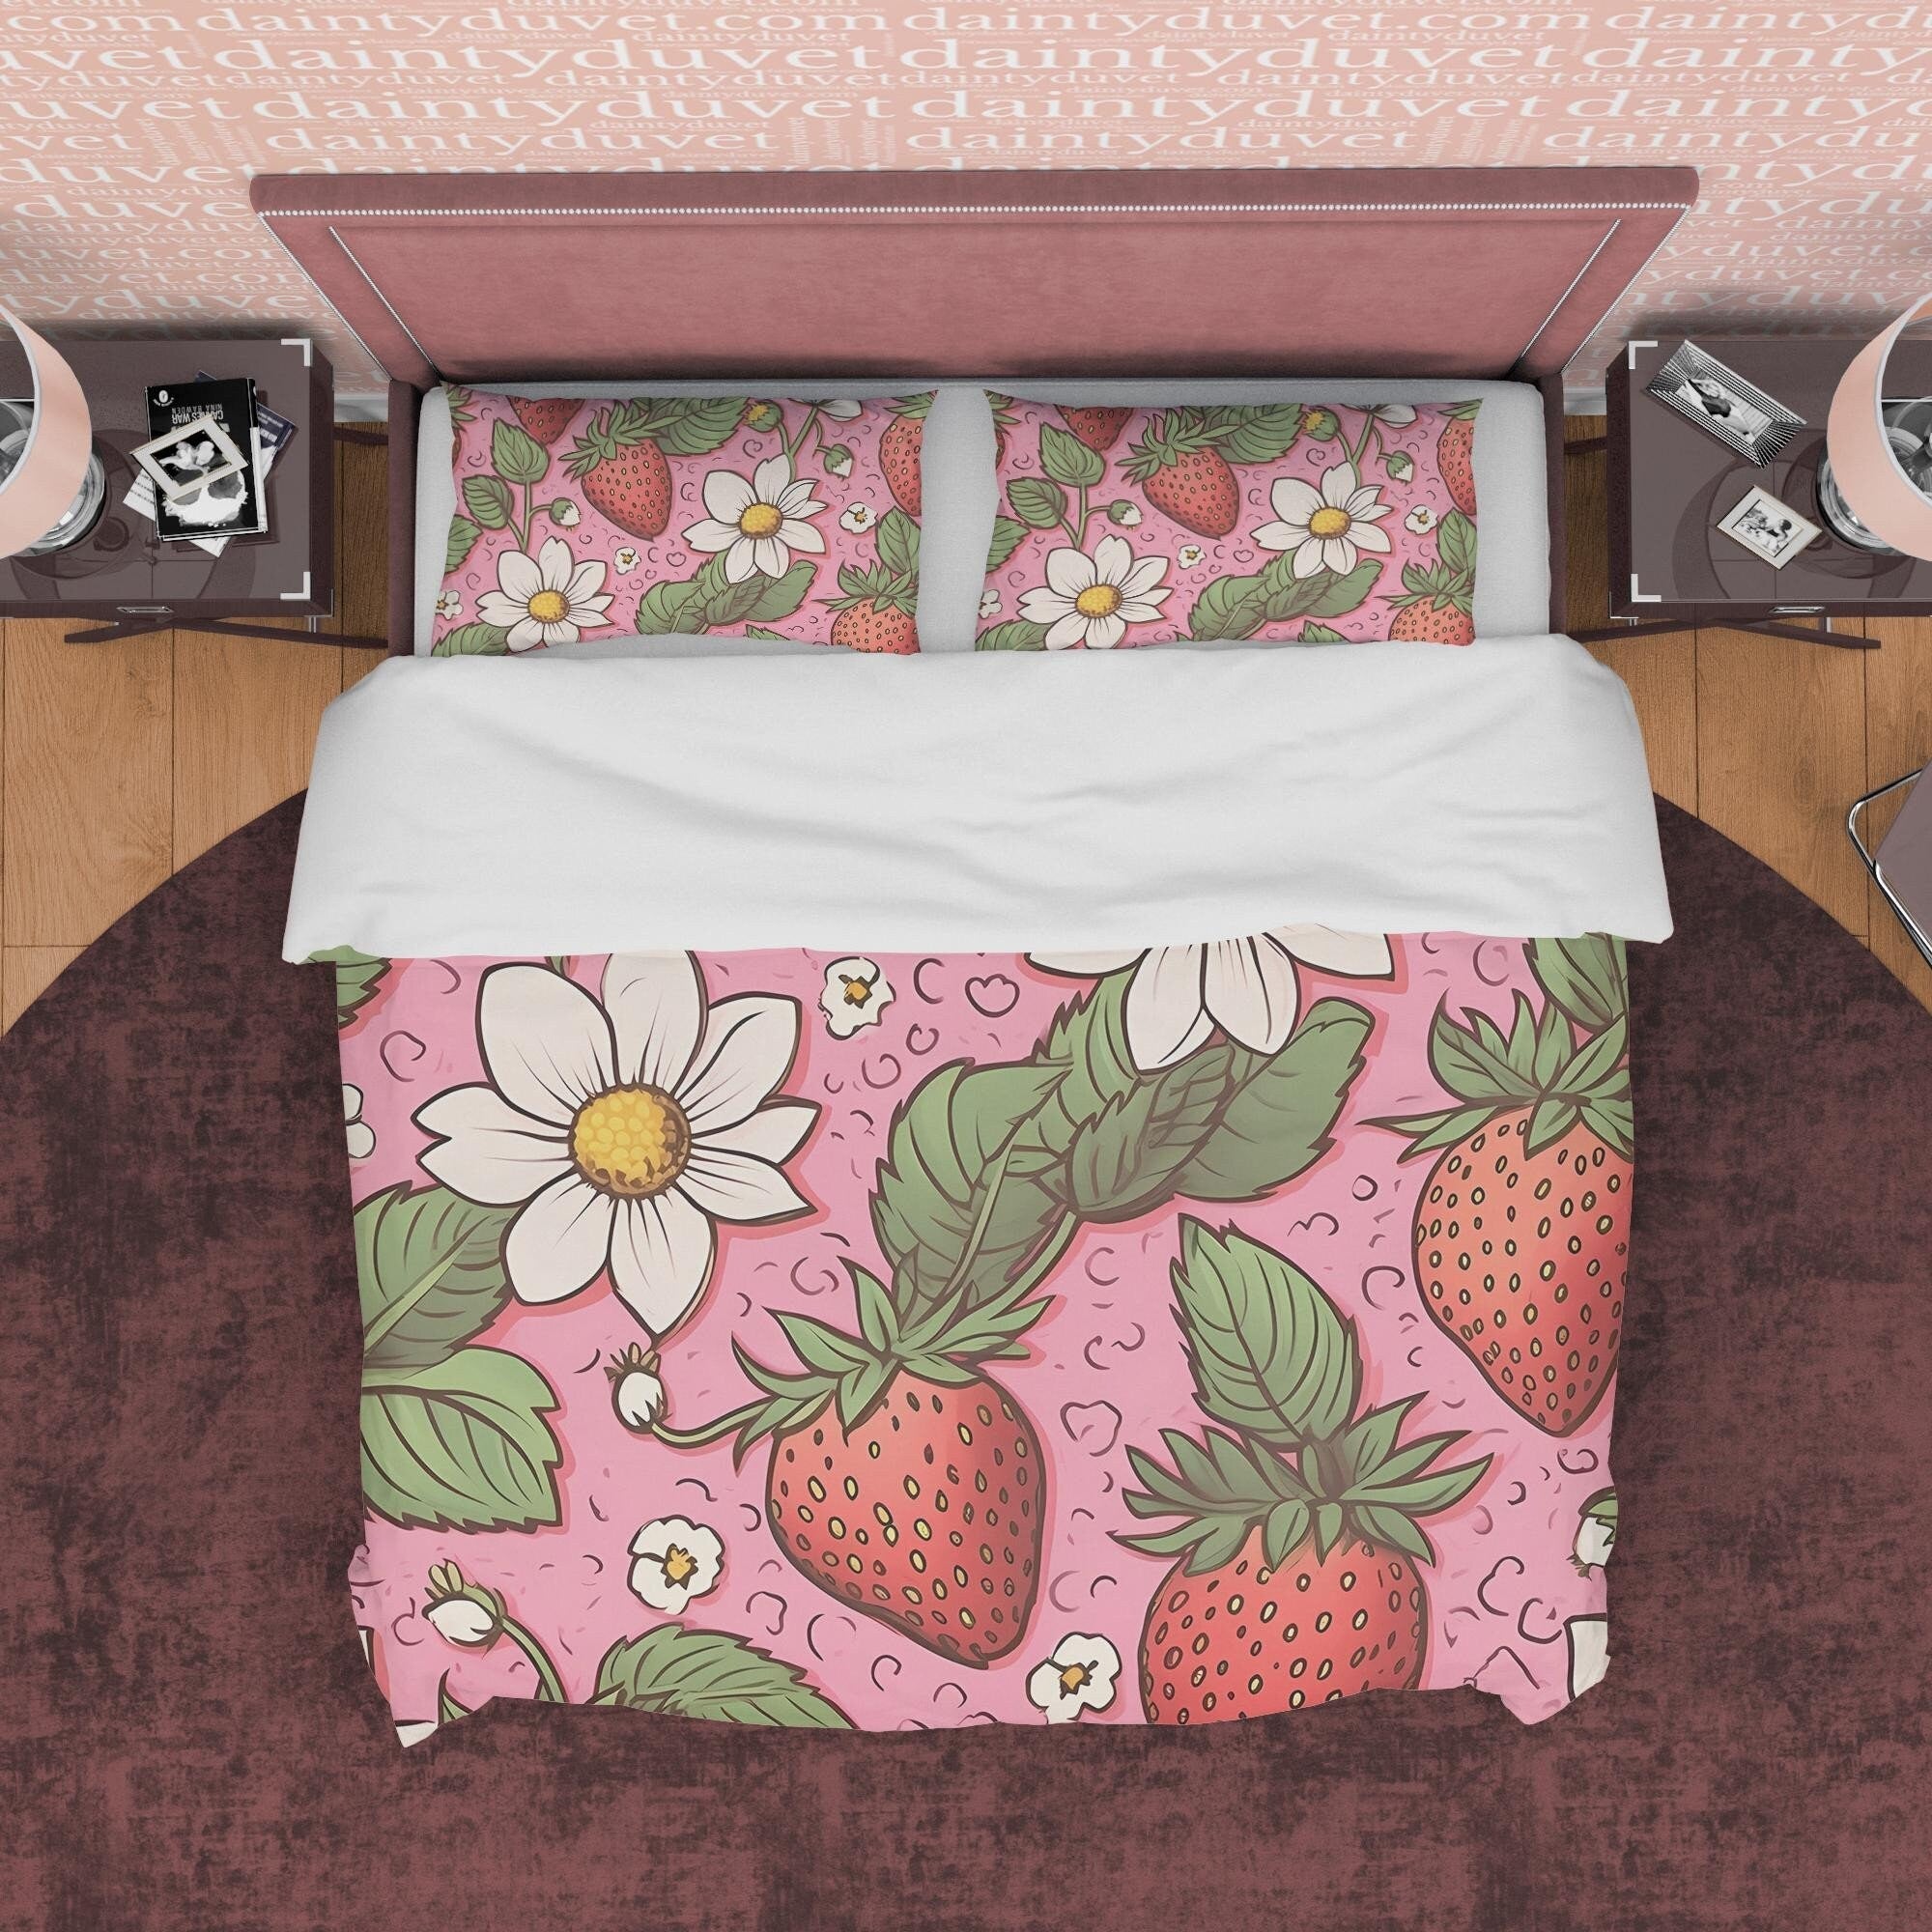 Cute Strawberry Duvet Cover Boho Bedroom Set, Floral Pink Bedspread, Girly Quilt Cover, Dorm Bedding, Baby Girl Toddler Bedding, Foodie Gift